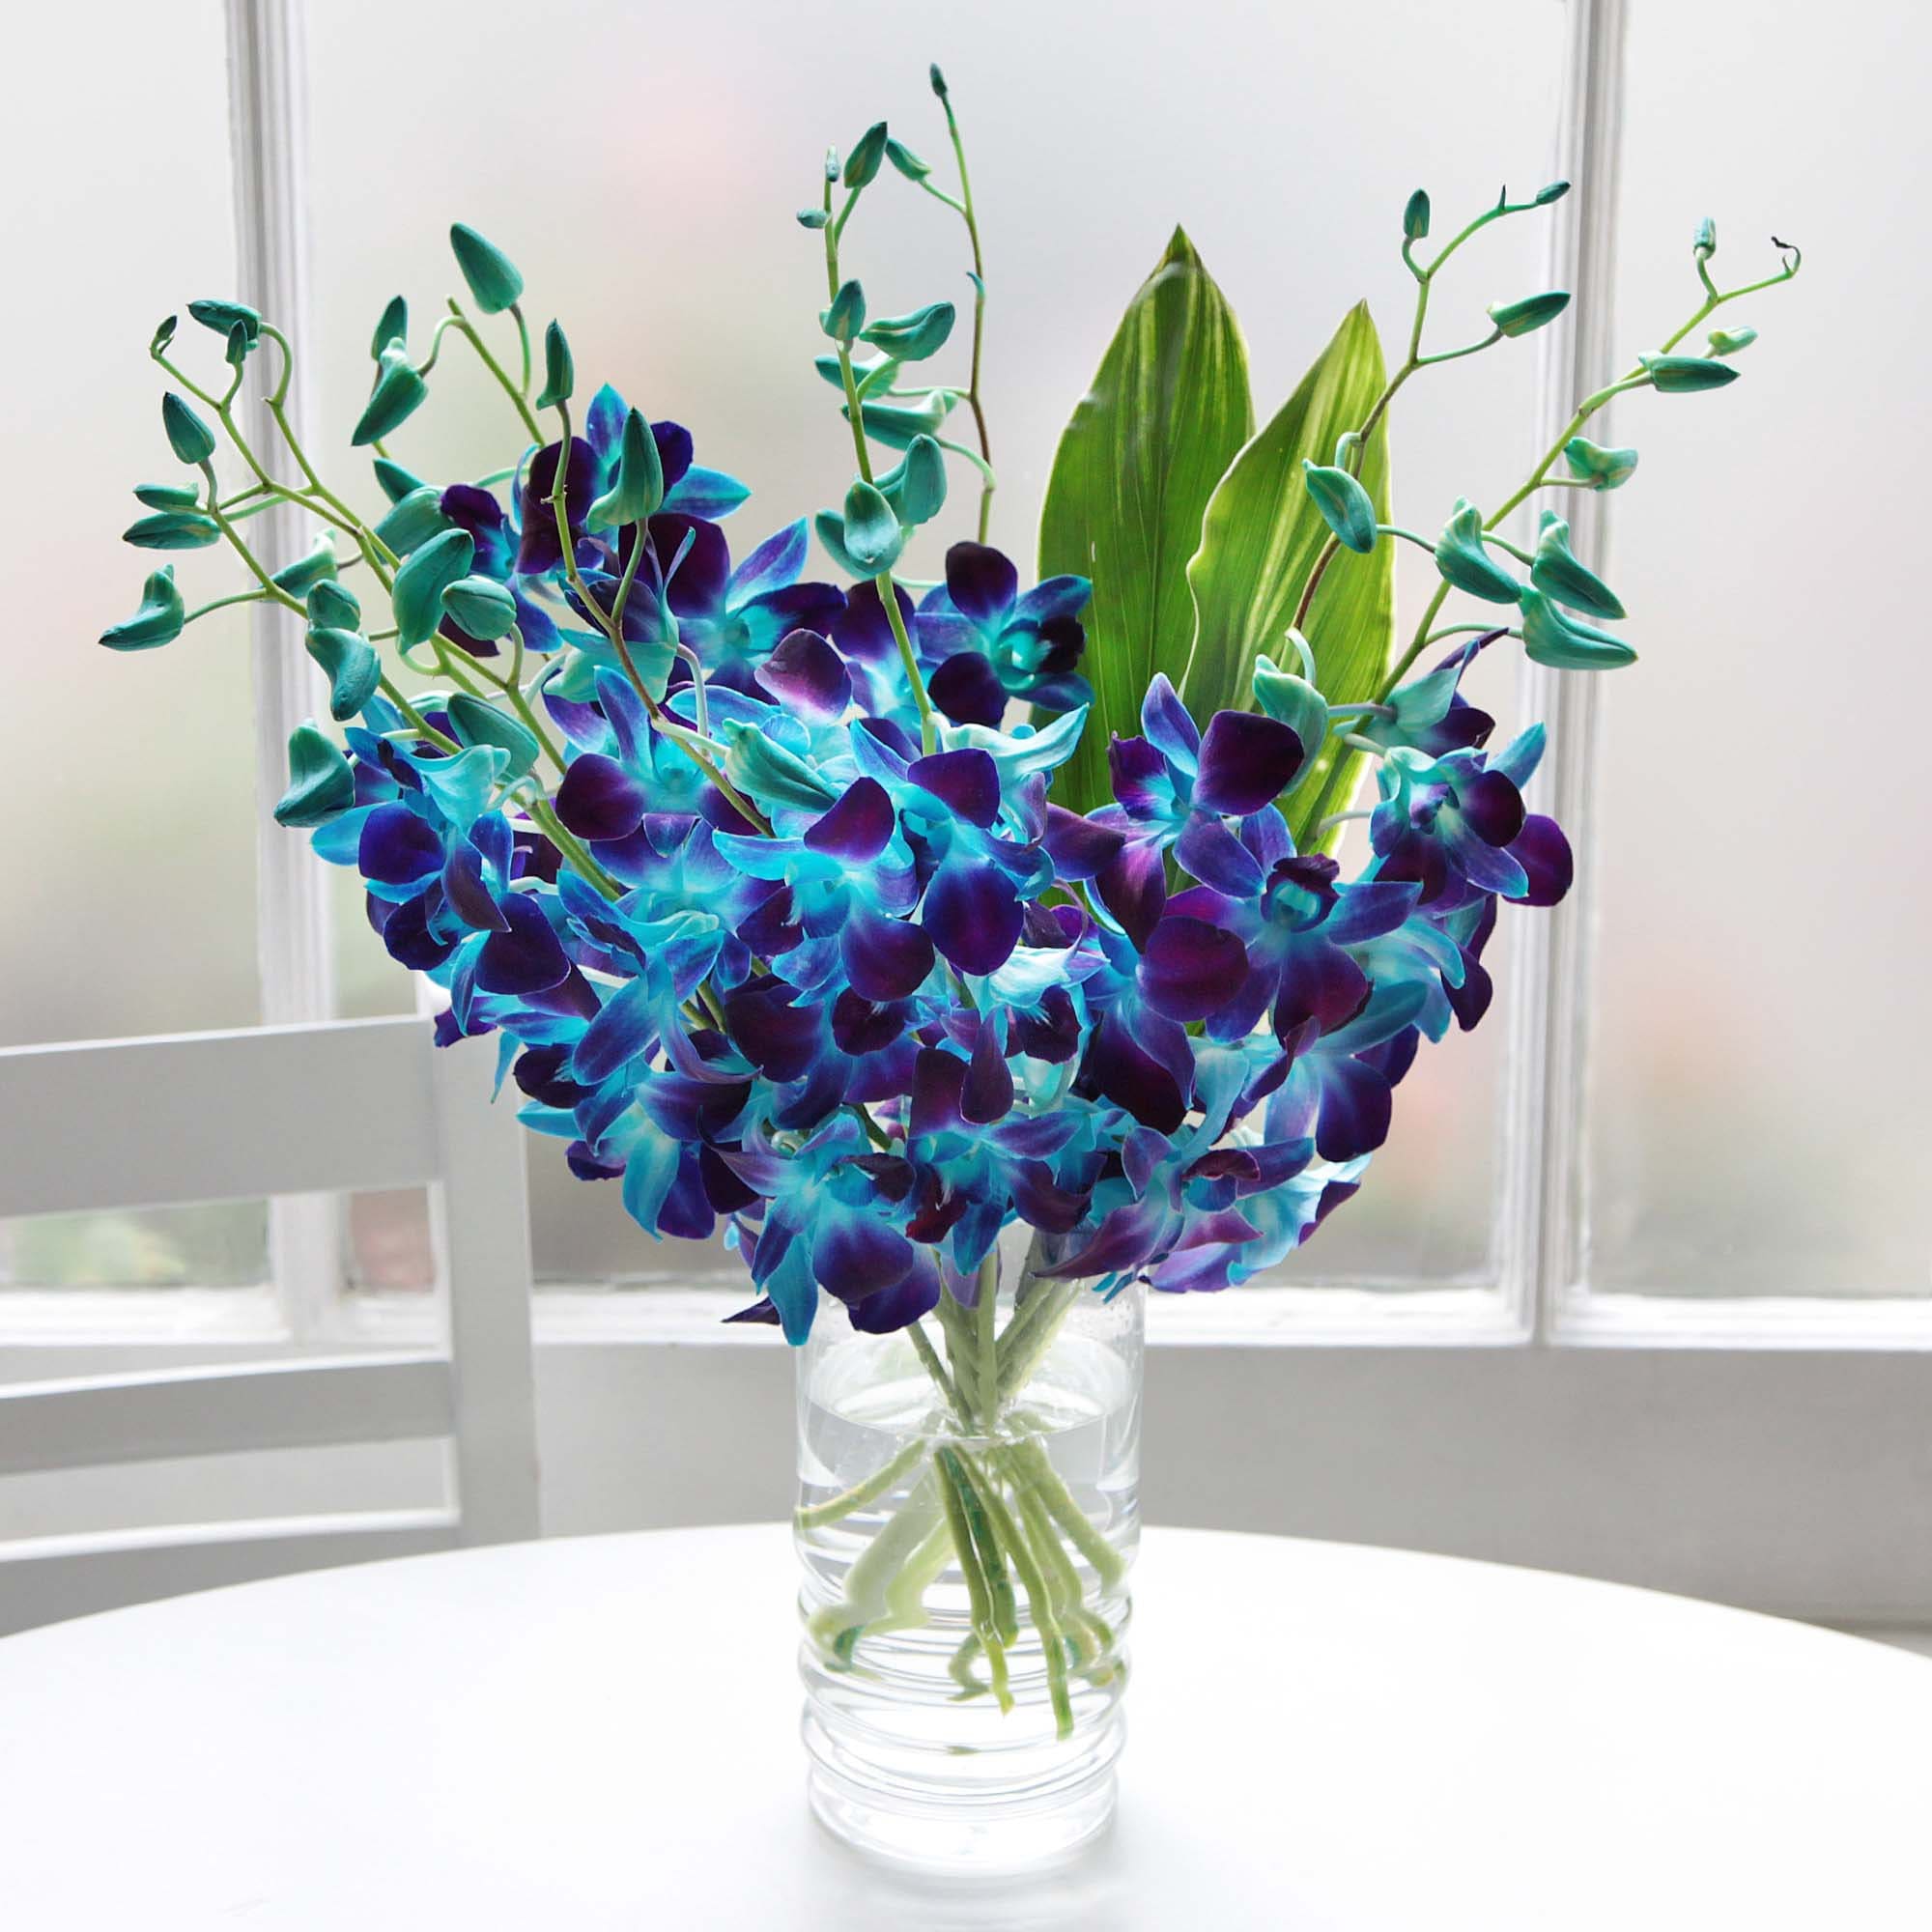 12 Stems of Fresh Cut Imported Electric Blue Orchids